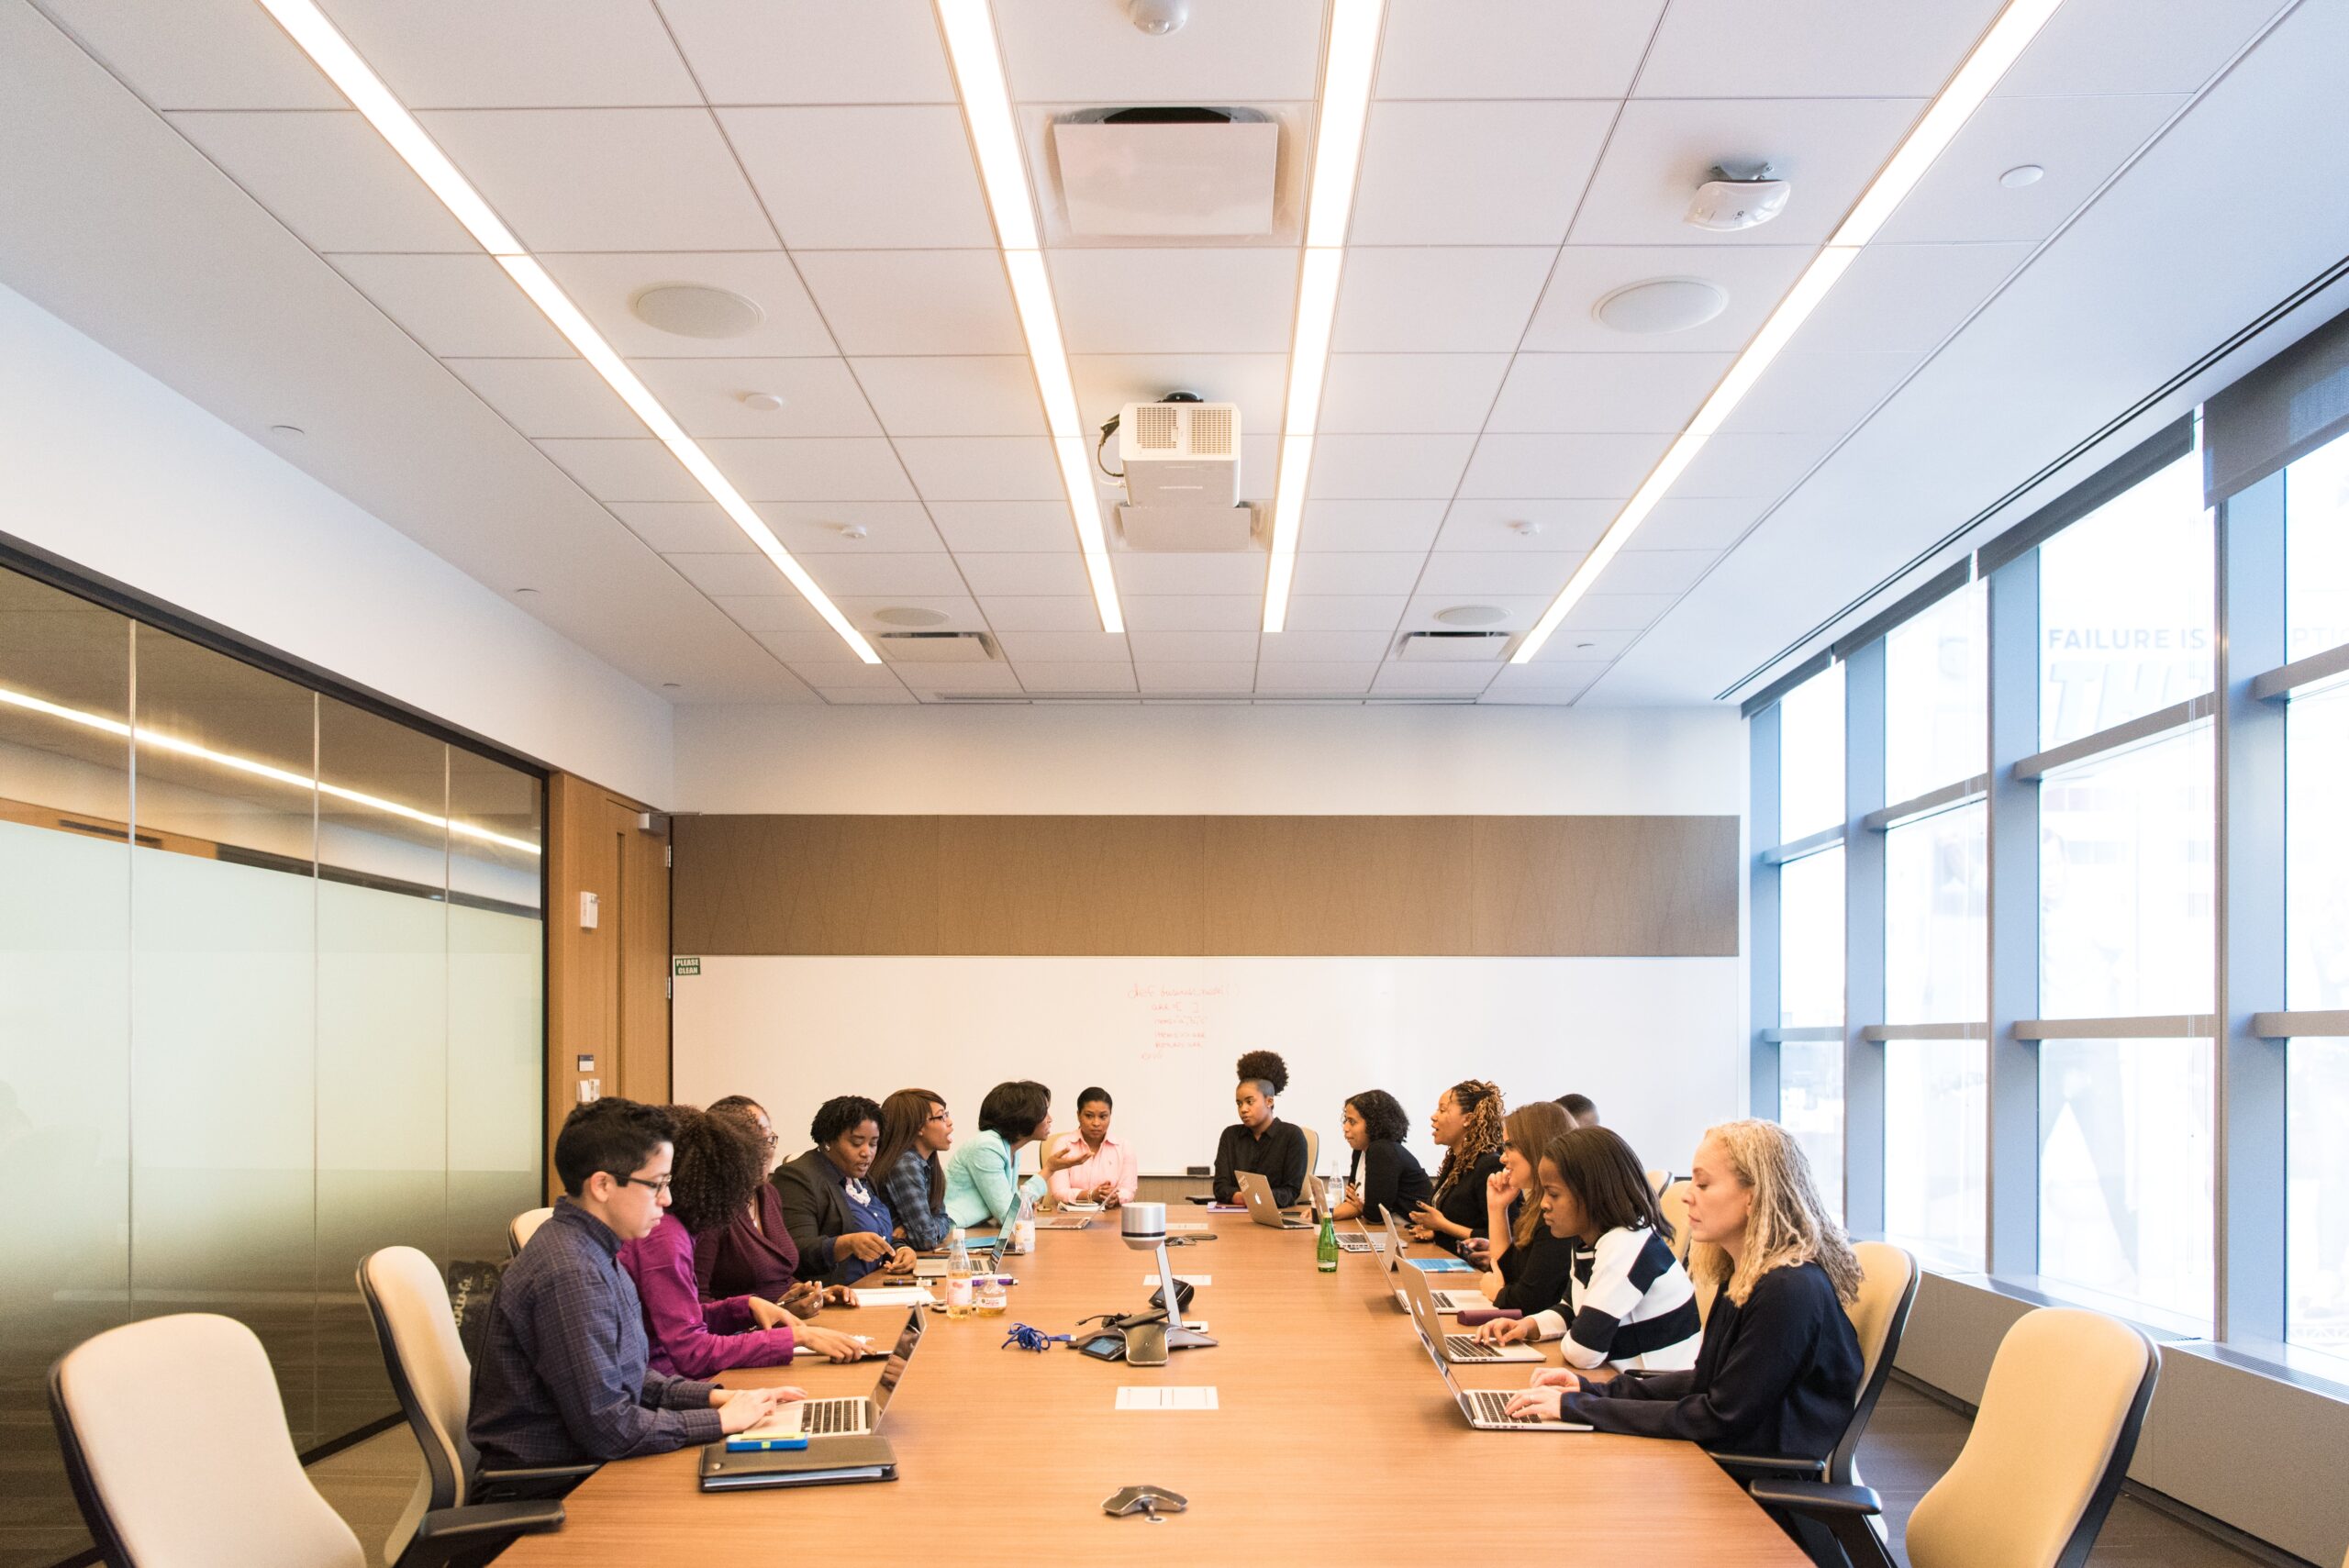 Members gathered in a conference room for a meeting, making notes on important takeaways.